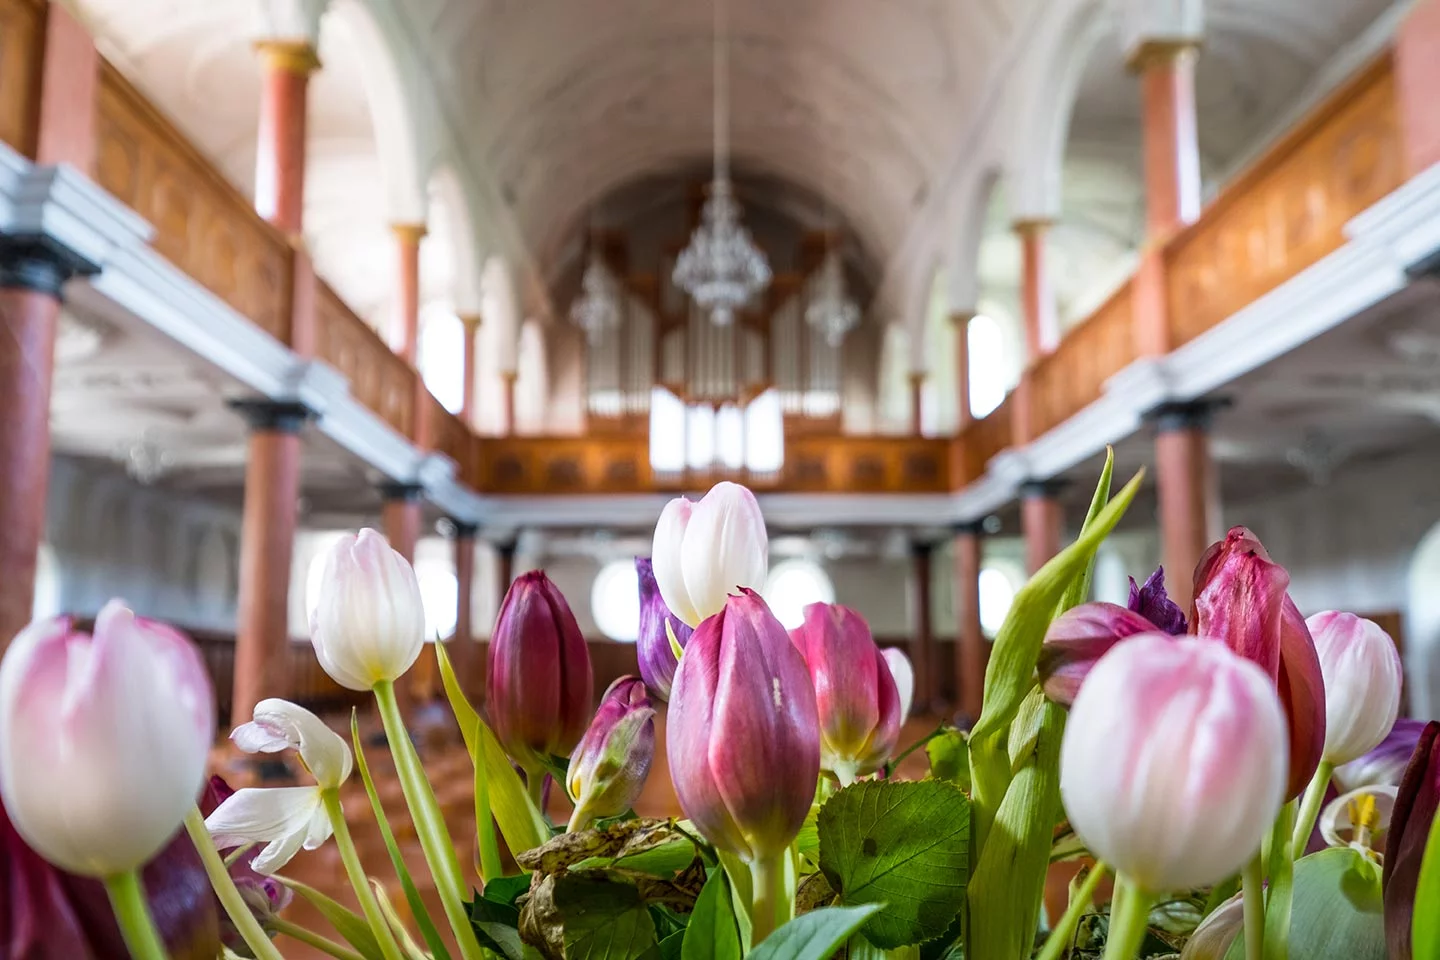 Zurich itinerary - Things to do in Zurich - St Peters Church Flowers Zurich